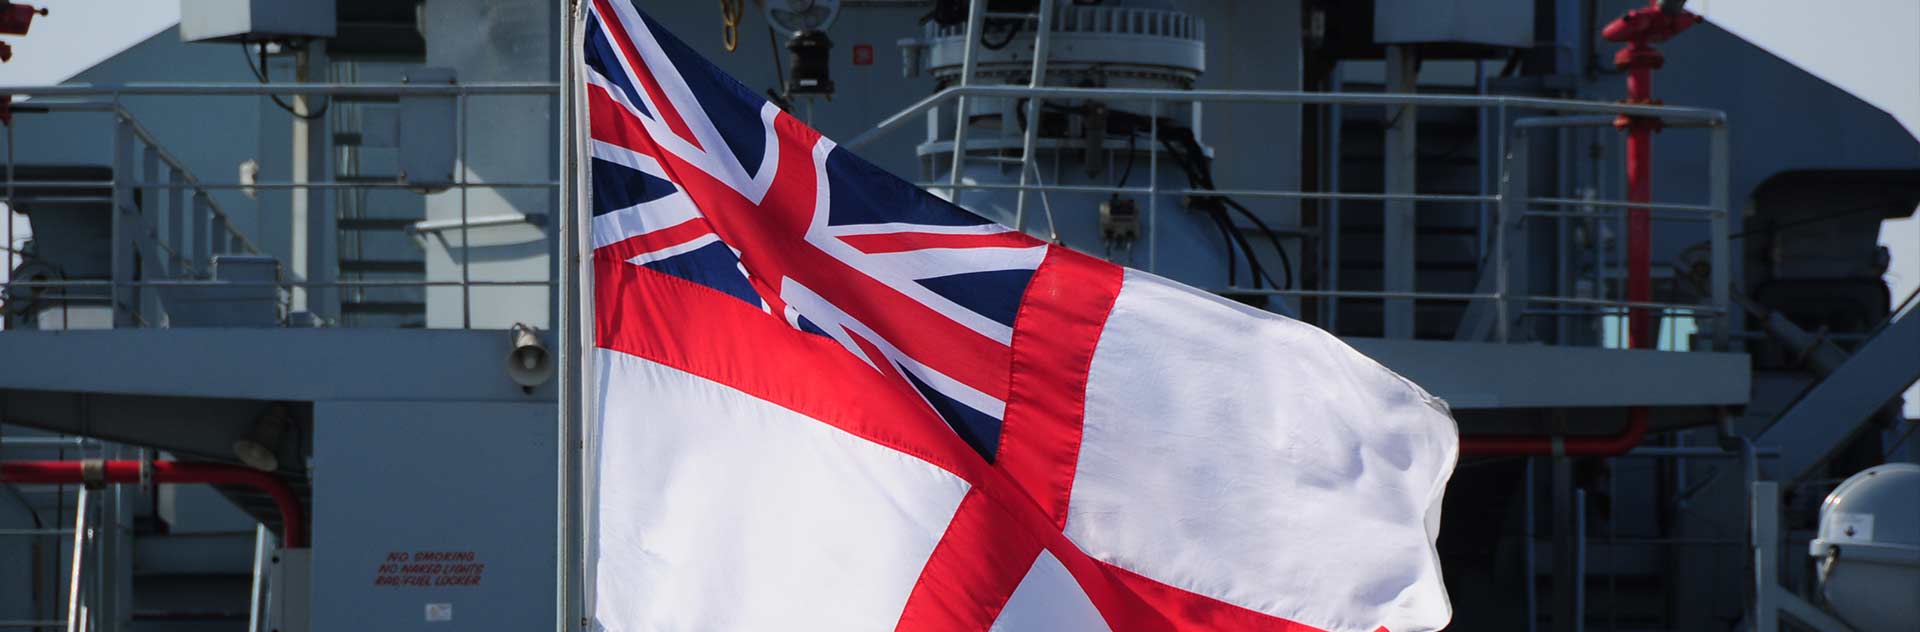 Maritime surveillance services for the UK Royal Navy